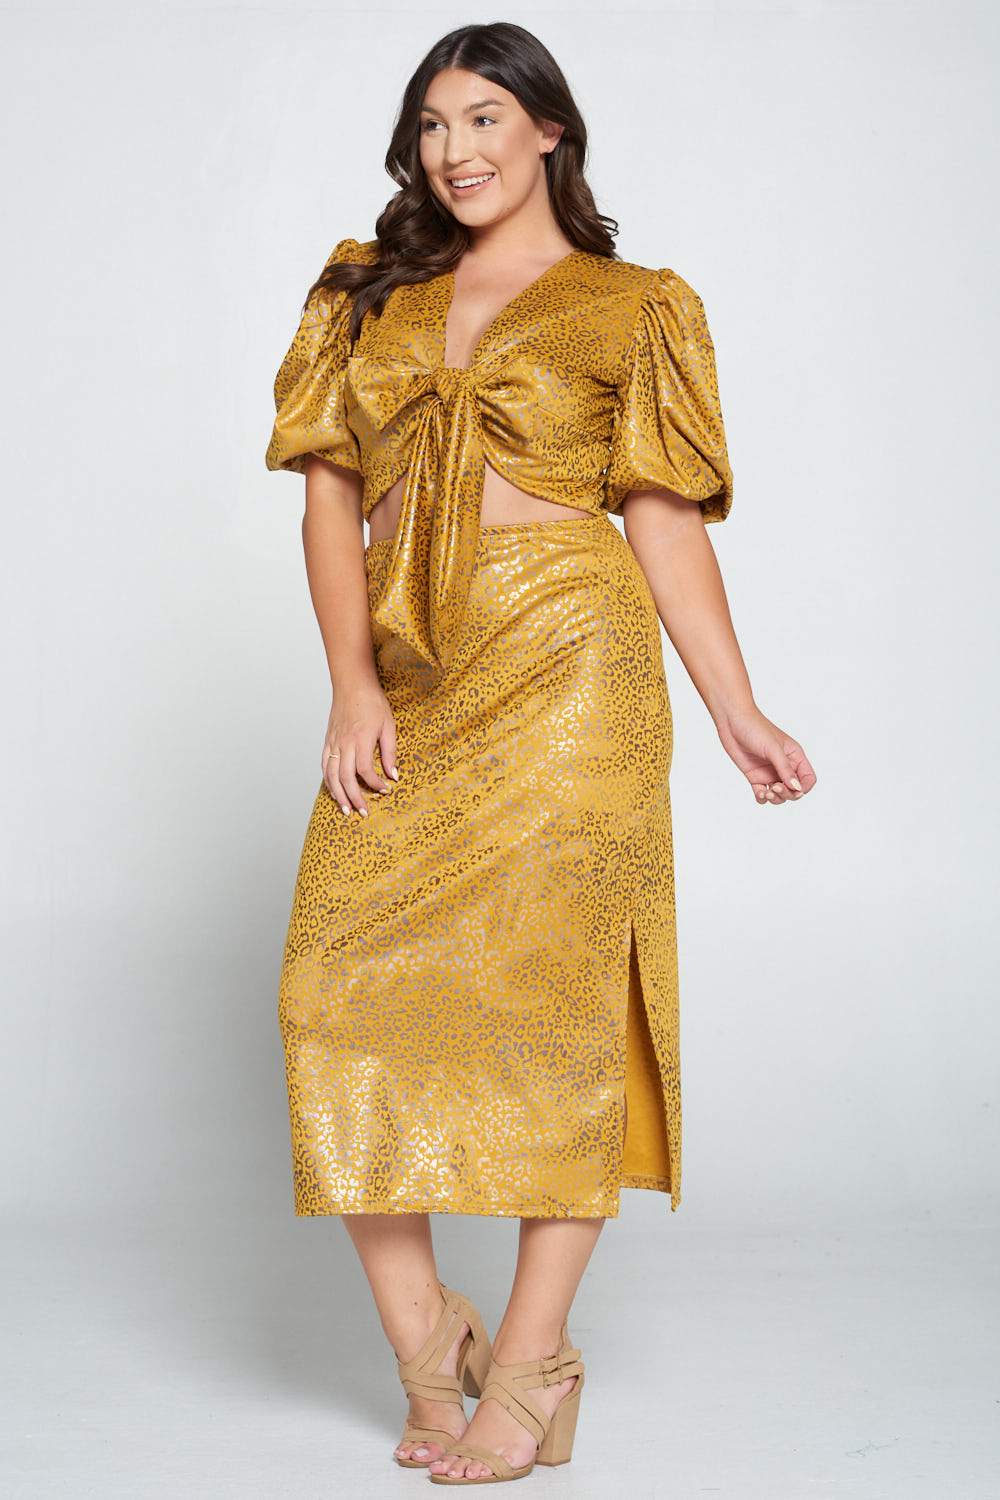 livd L I V D women's trendy contemporary plus size clothing cheetah animal silver foil print wrap top with exaggerated sleeves and high waist midi skirt in mustard yellow 